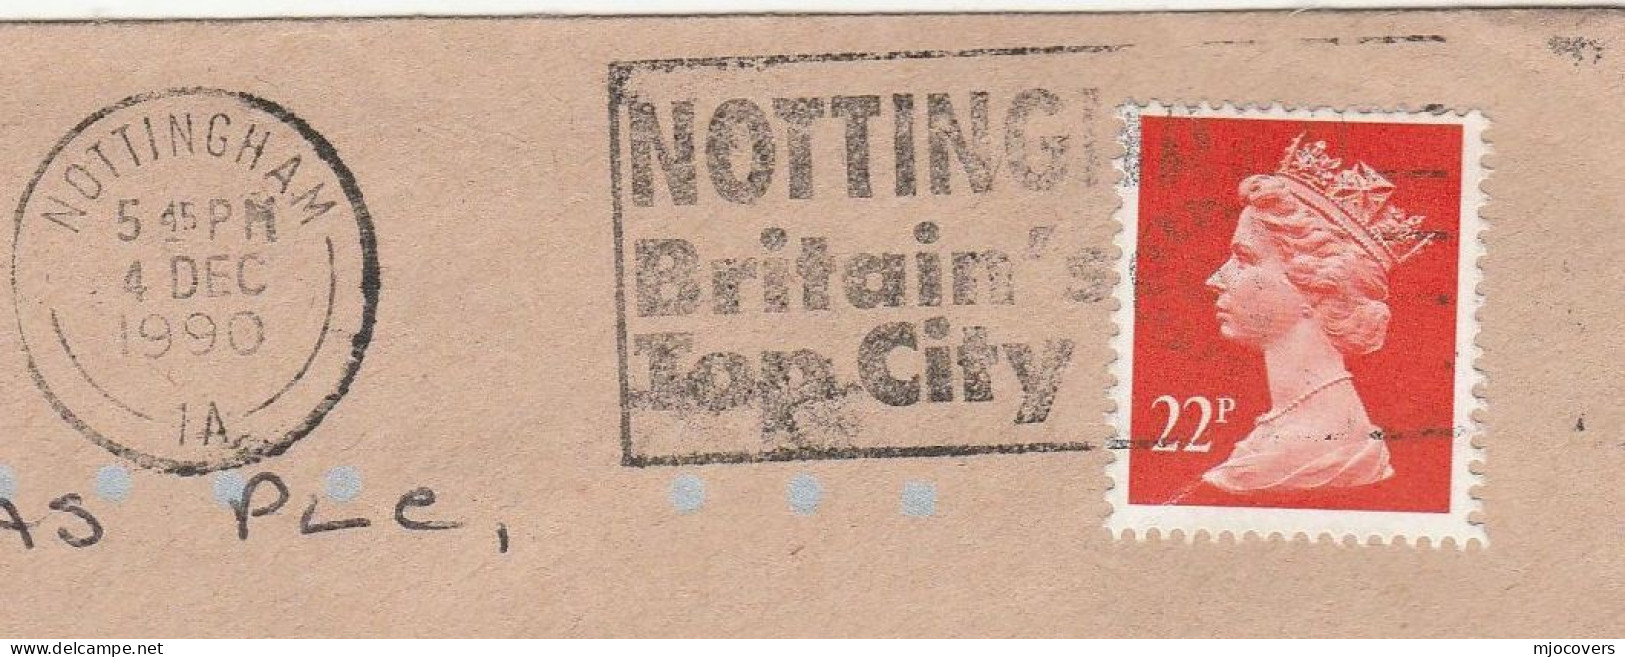 Cover NOTTINGHAM Britain's TOP CITY Slogan 1990 Gb Stamps - Covers & Documents